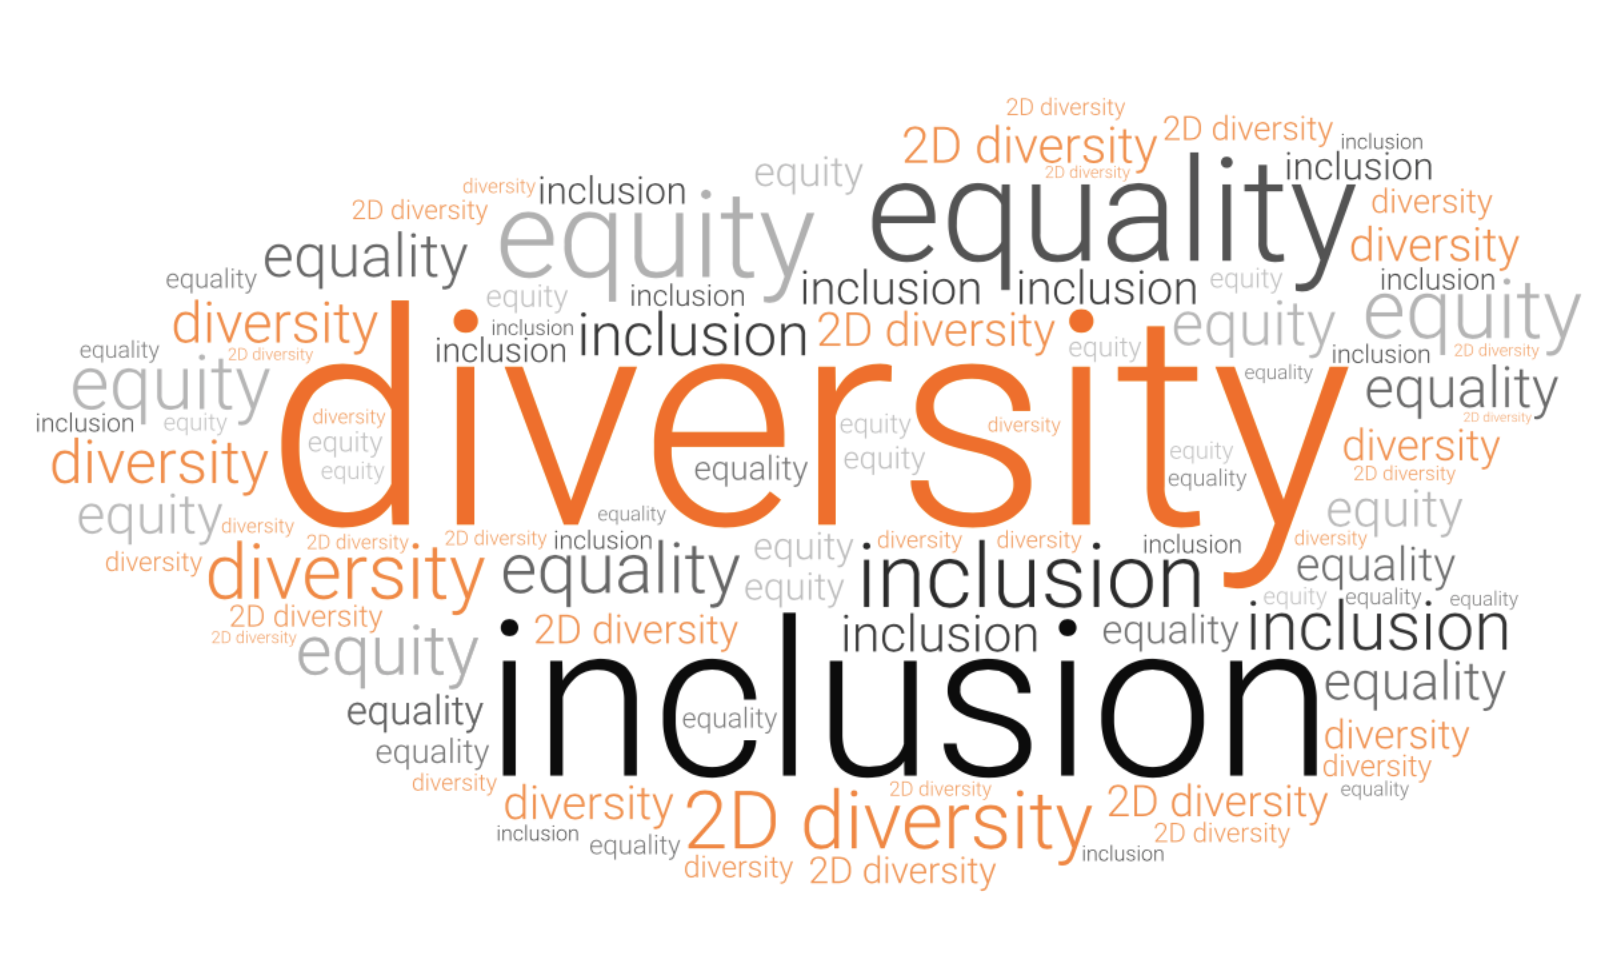 Wordle-diversity-inclusion-equality-equity-2d